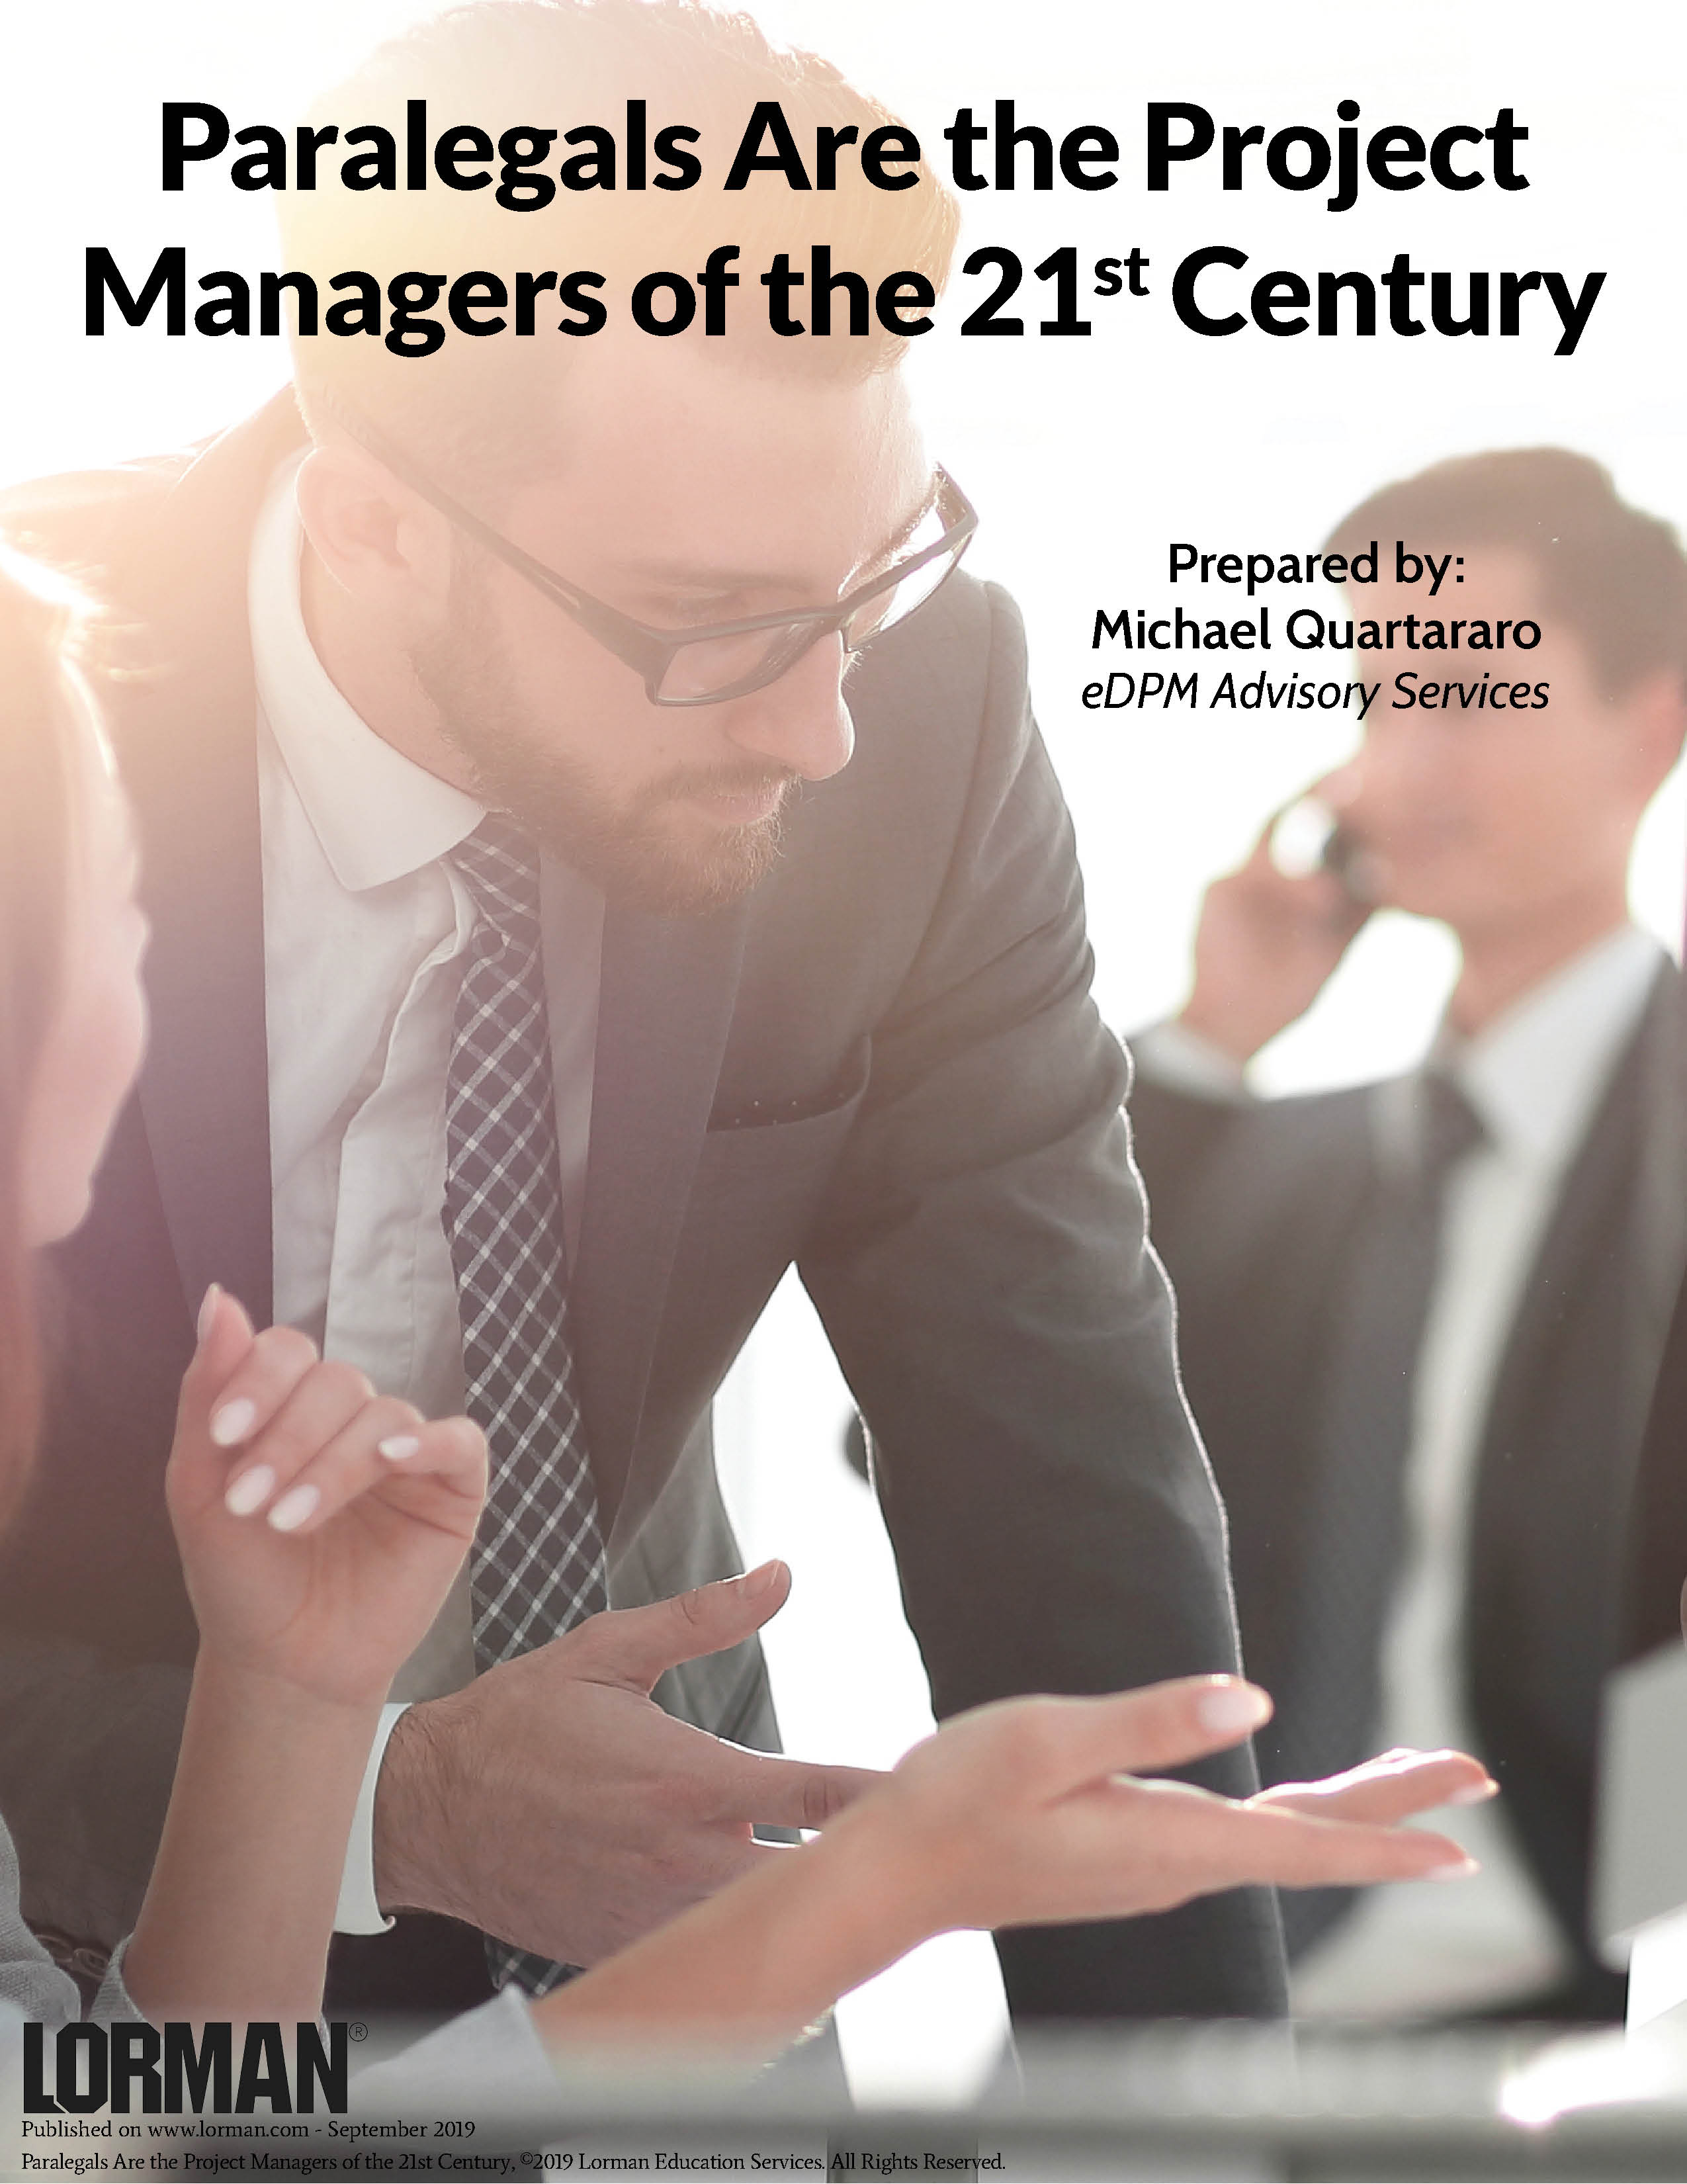 Paralegals Are the Project Managers of the 21st Century